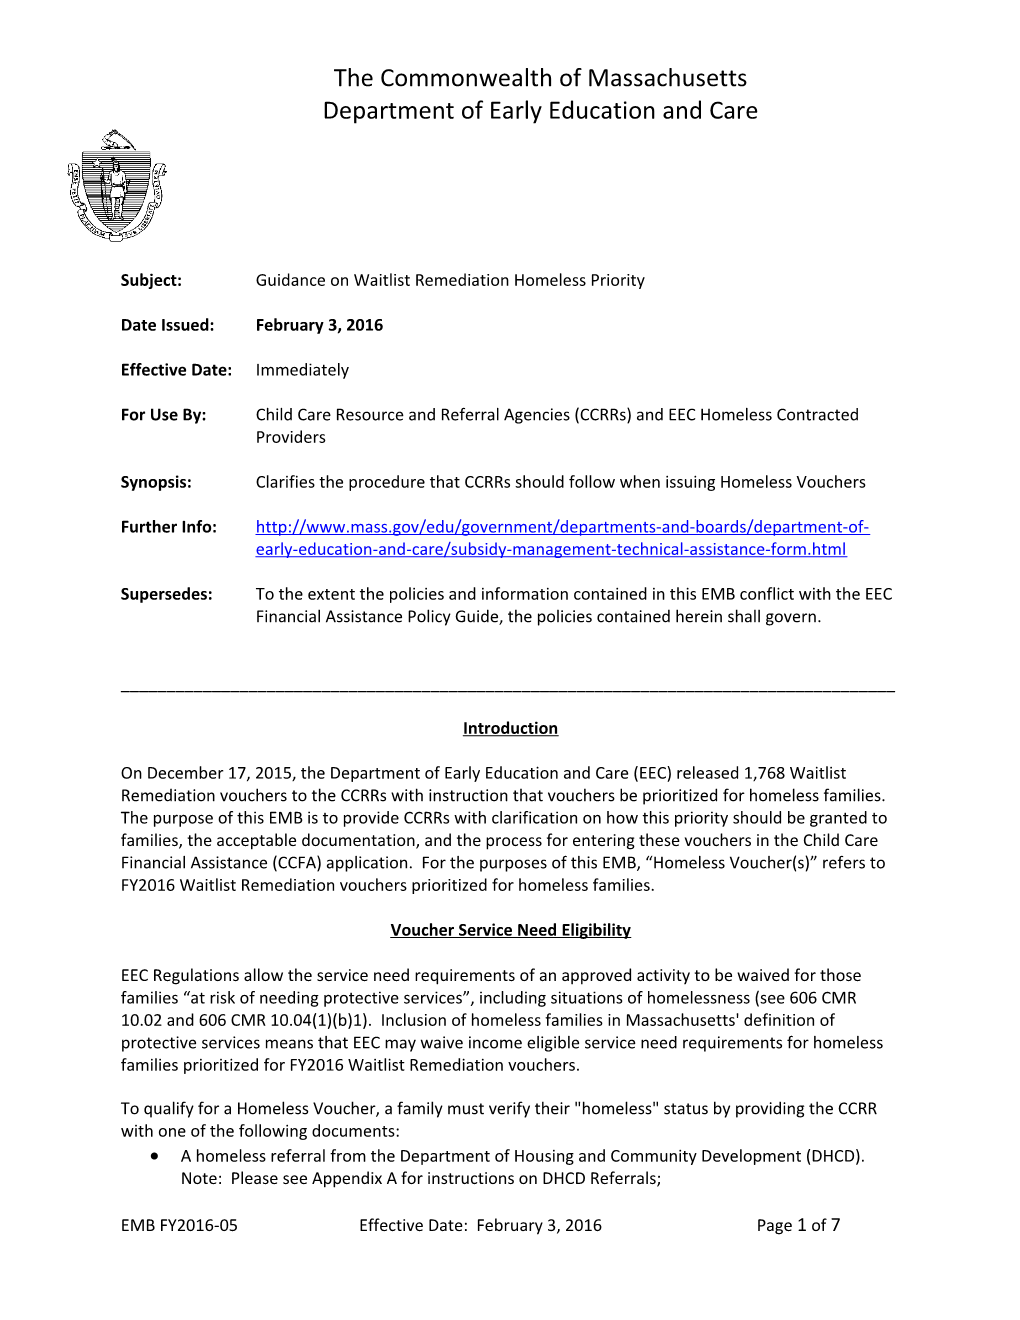 Subject: Guidance on Waitlist Remediation Homeless Priority